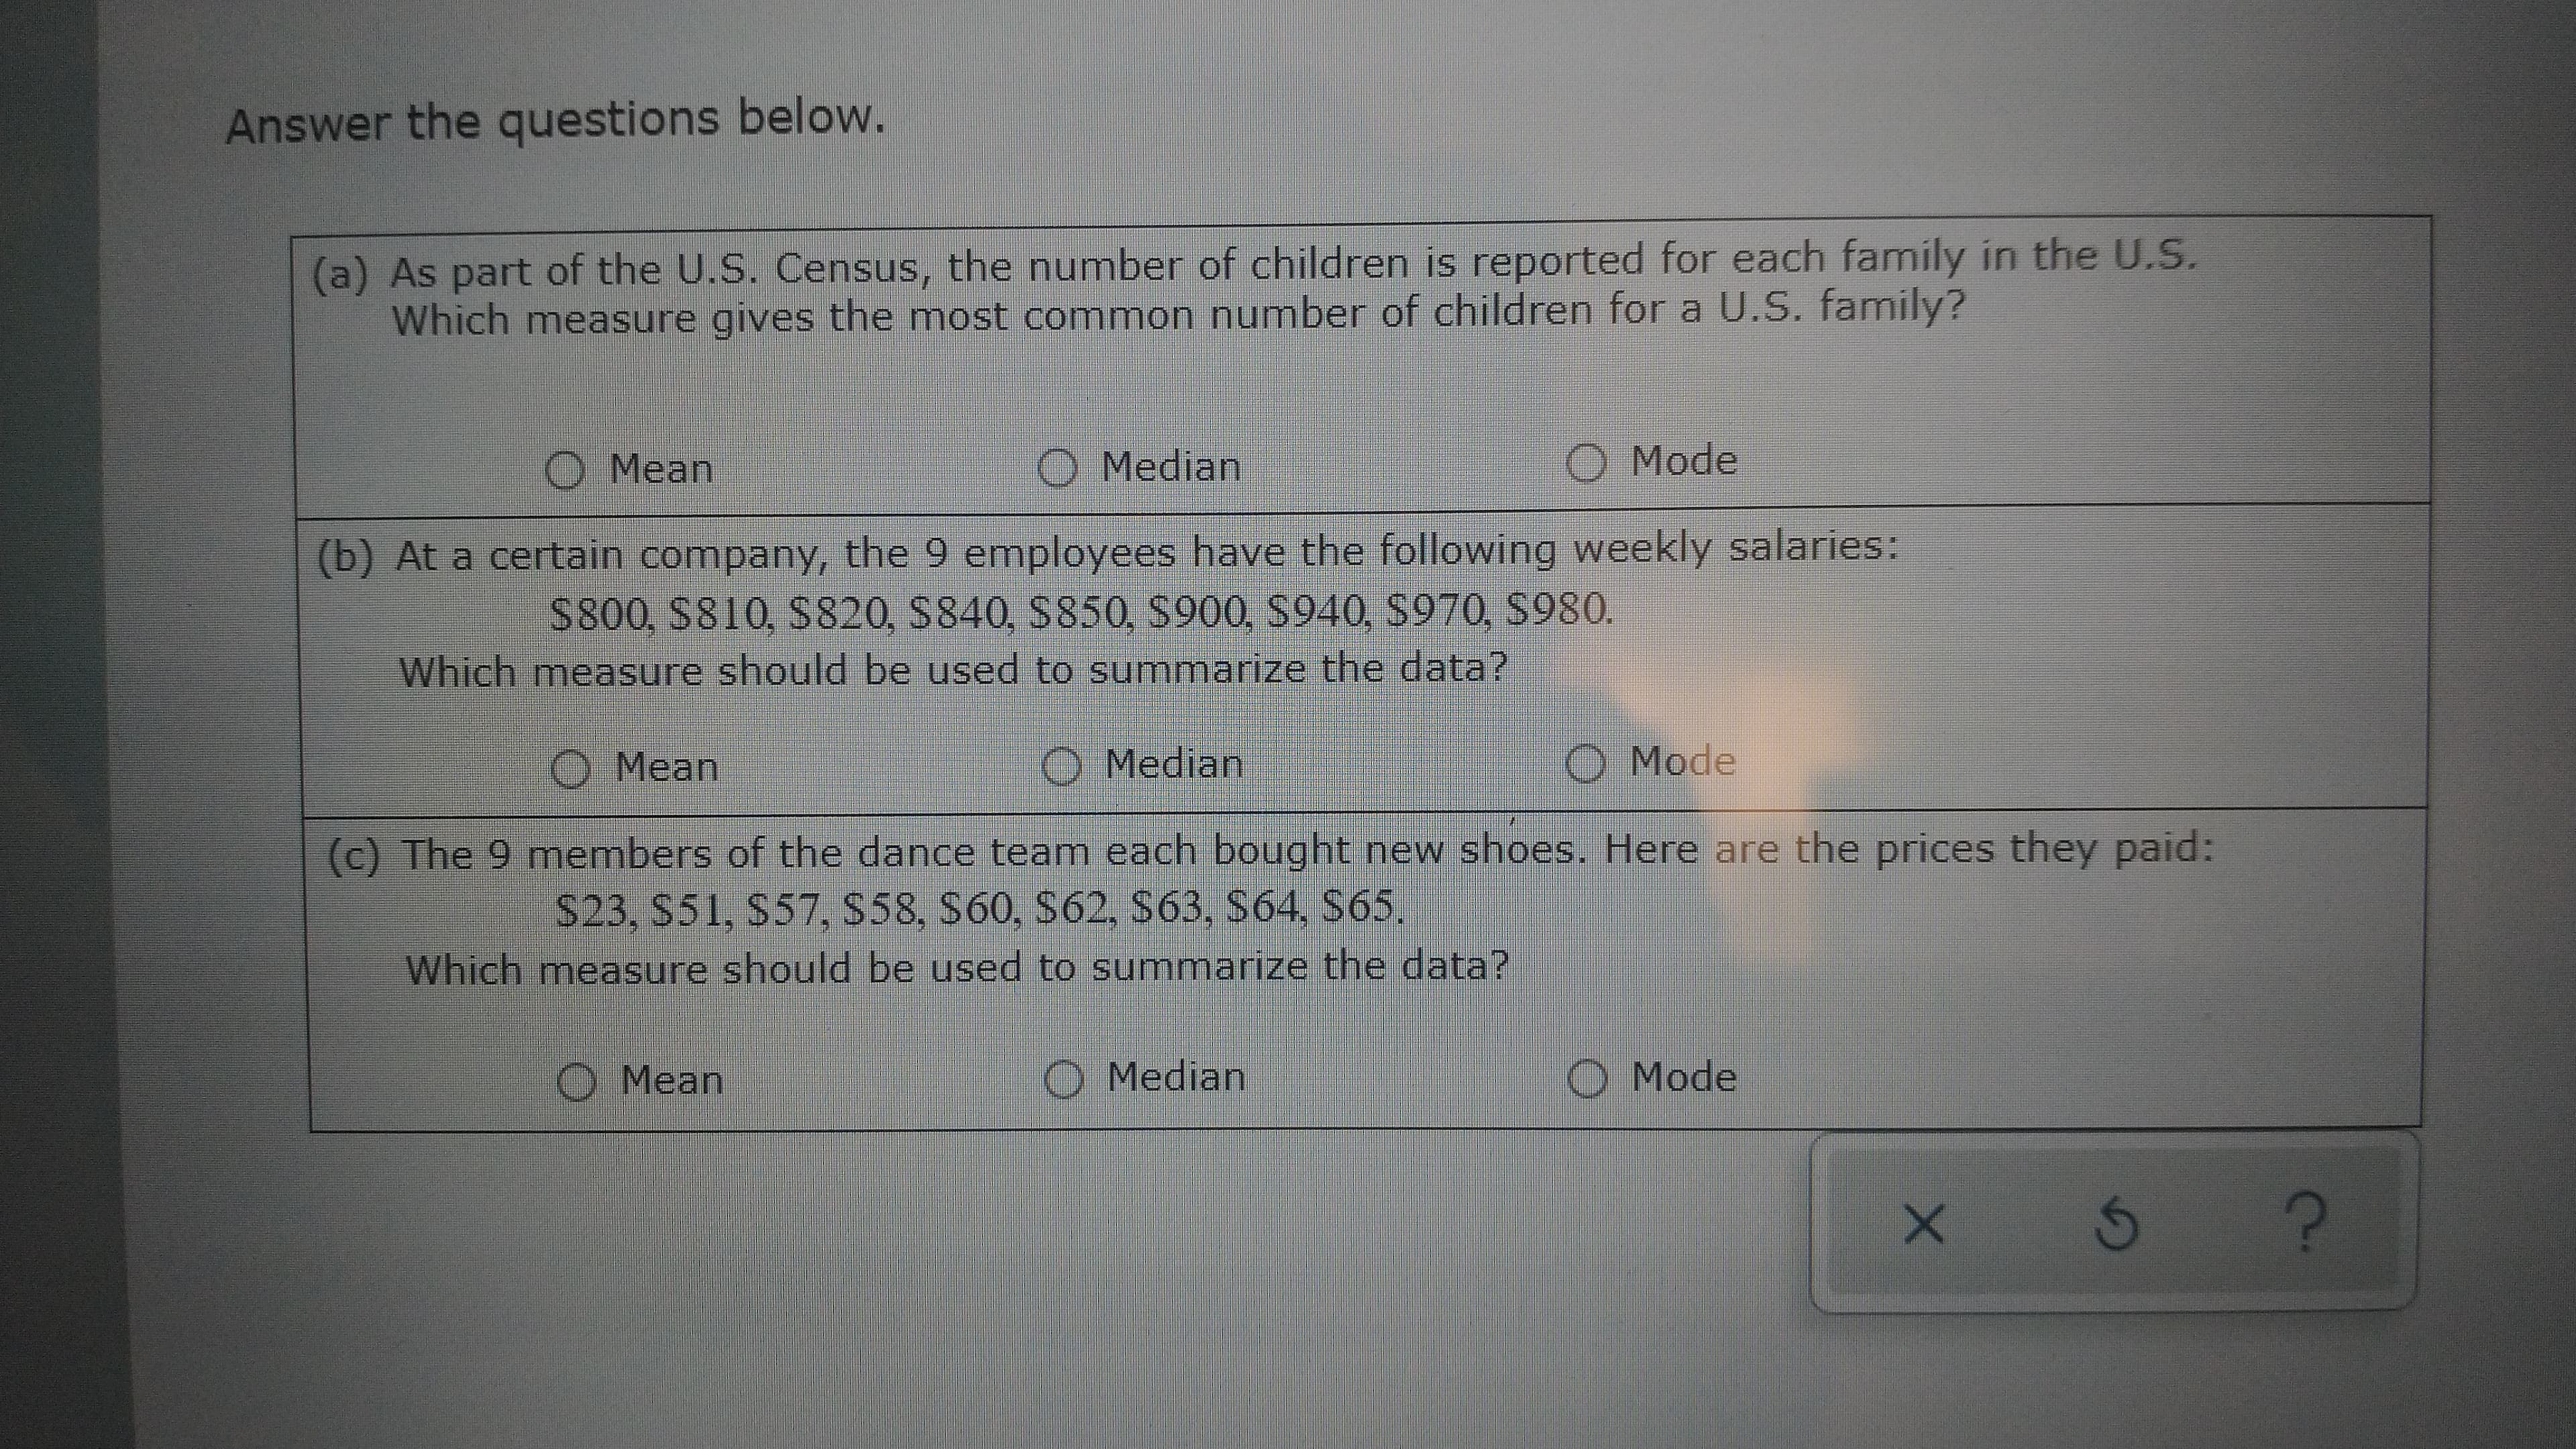 Answer the questions below.
(a) As part of the U.S. Census, the number of children is reported for each family in the U.S.
Which measure gives the most common number of children for a U.S. family?
O Mean
Median
O Mode
(b) At a certain company, the 9 employees have the following weekly salaries:
S800, S810, S820, S840, S850, S900, S940, S970, S980.
Which measure should be used to summarize the data?
O Median
O Mode
O Mean
$23, S51, $57, S58, S60, S62, S63, S64, S65.
Which measure should be used to summarize the data?
(c) The 9 members of the dance team each bought new shoes. Here are the prices they paid:
O Median
O Mode
O Mean
